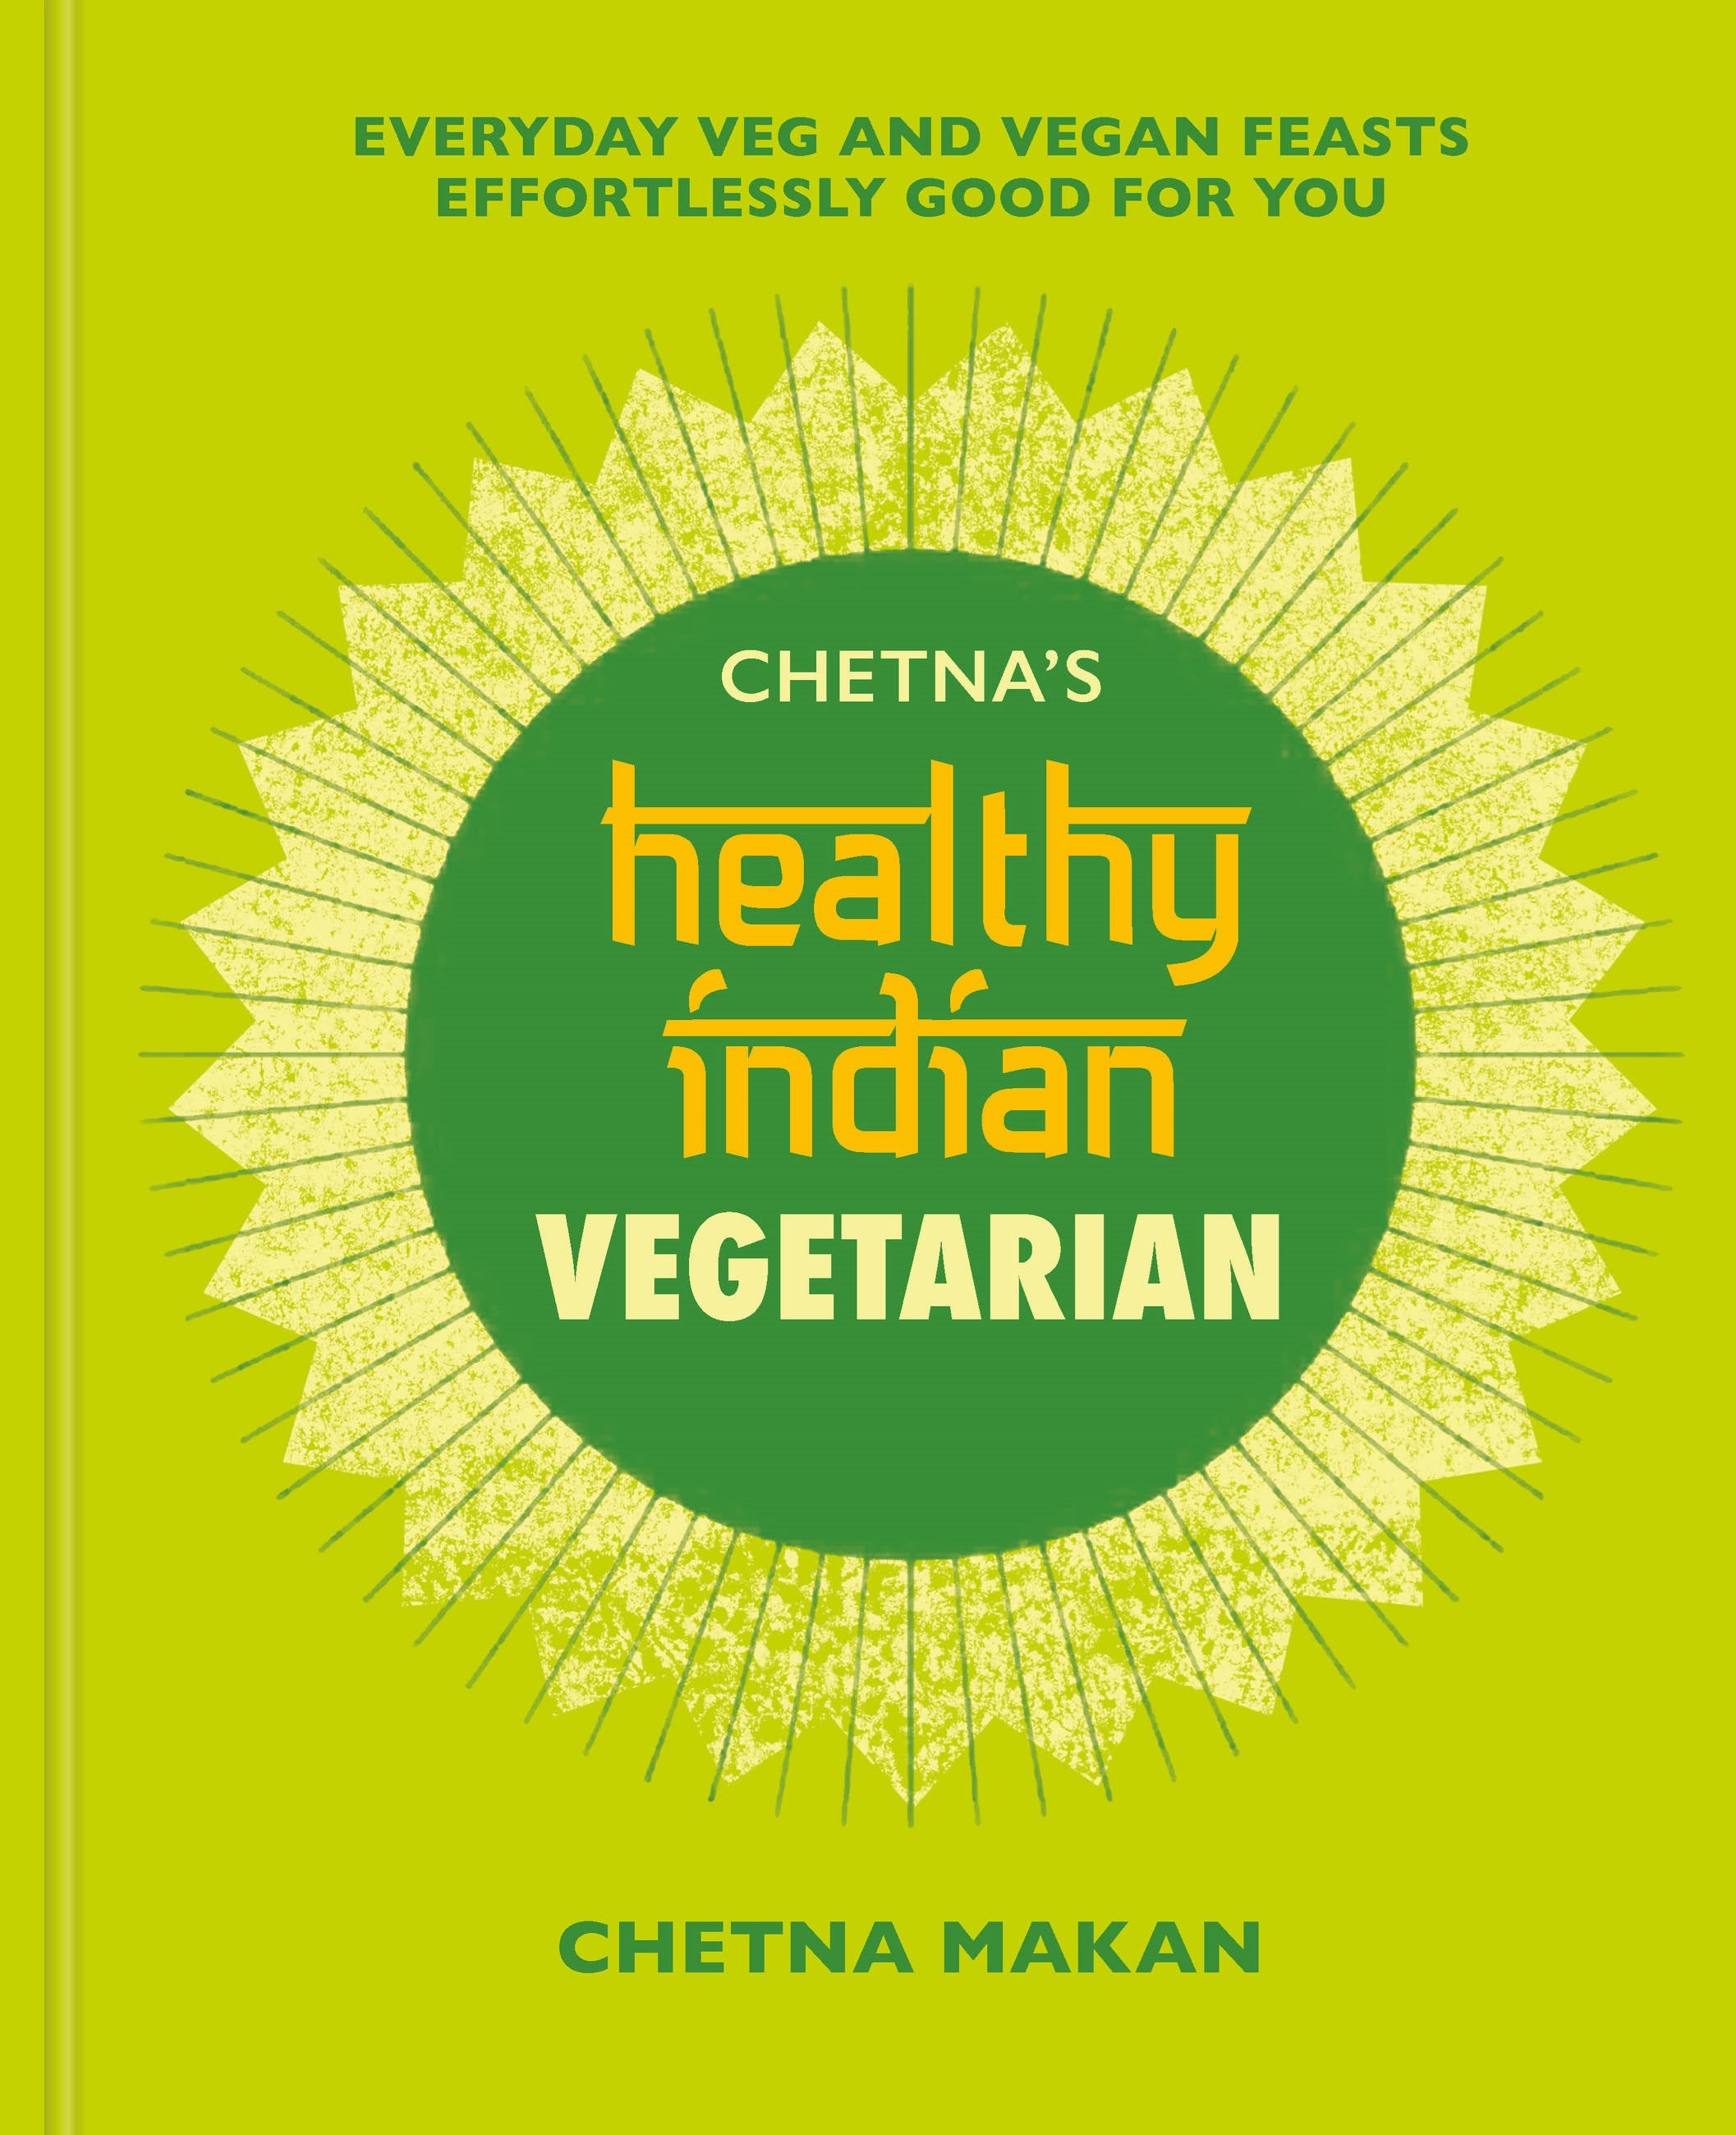 Chetna's Healthy Indian: Vegetarian : Everyday Veg and Vegan Feasts Effortlessly Good for You